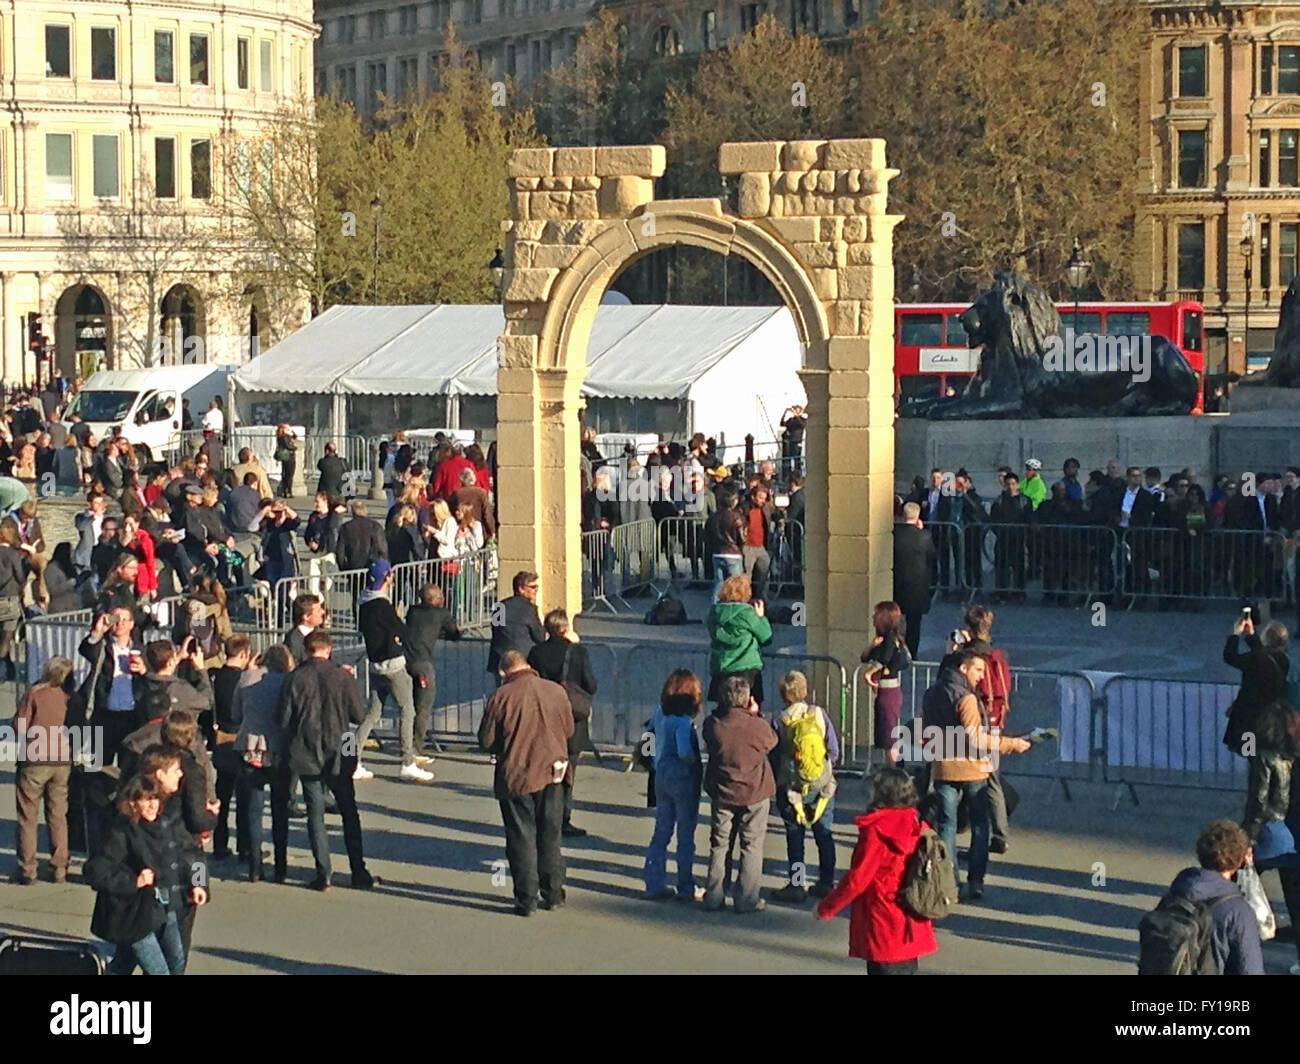 London, UK. 19th April, 2016. Crowds in London's Trafalgar Square surrounding a recreation of the historic Arch of Triumph from the Syrian city of Palmyra.  The ruin has been recreated using 3D printed marble and will travel the world. Credit:  Amanda Lewis/Alamy Live News Stock Photo